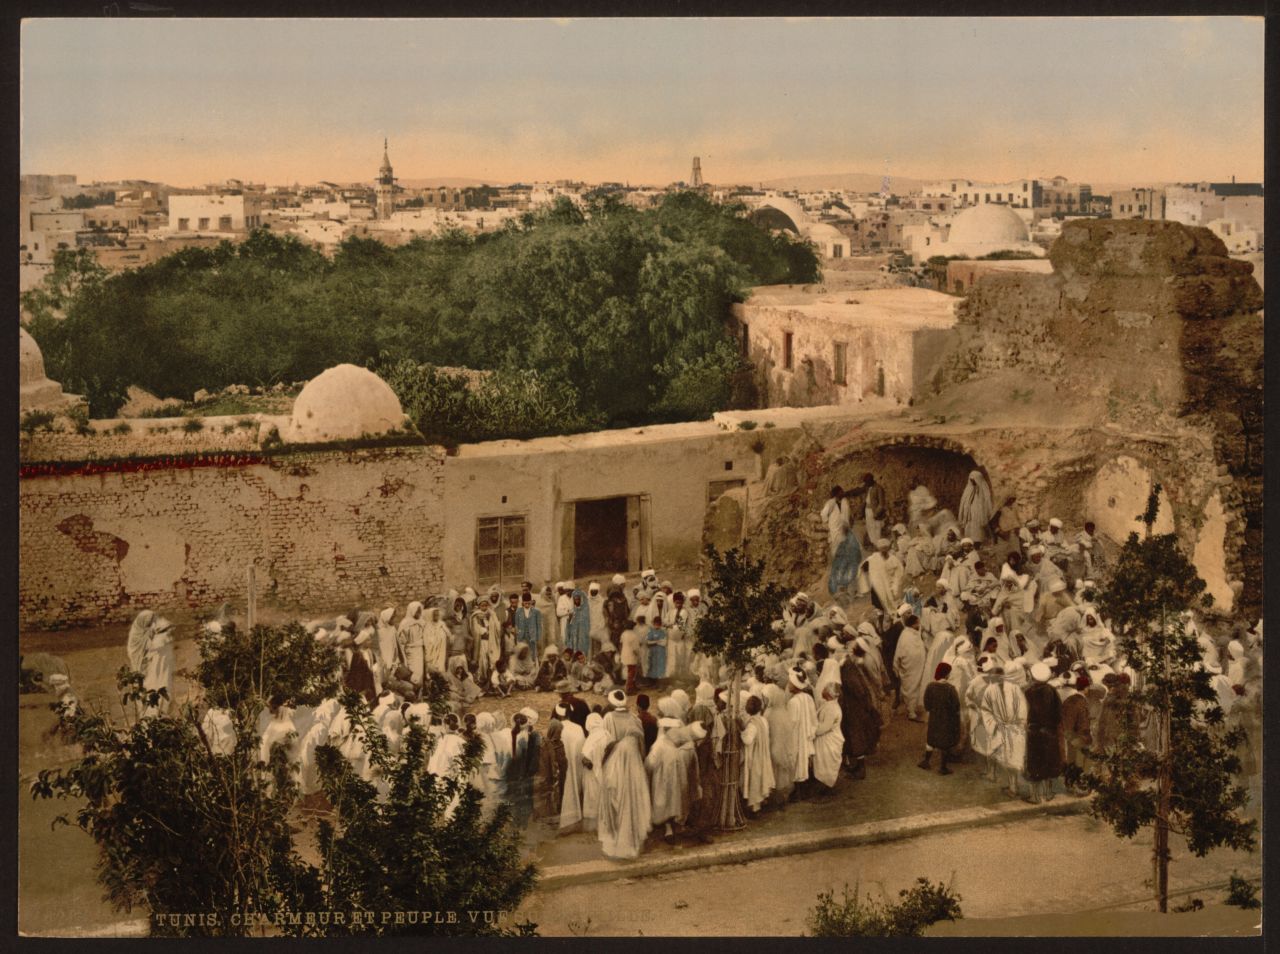 A crowd surrounds a snake charmer in Tunis. Photochroms were created by taking the negative and exposing it to multiple flat surfaces such as stone, glass or zinc. As many as 24 separate slides would we be used, each printing a different color. Together the inks would blend and create realistic hues. (Find out more about the process <a href="http://www.loc.gov/pictures/collection/pgz/process.html" target="_blank" target="_blank">here</a>.)